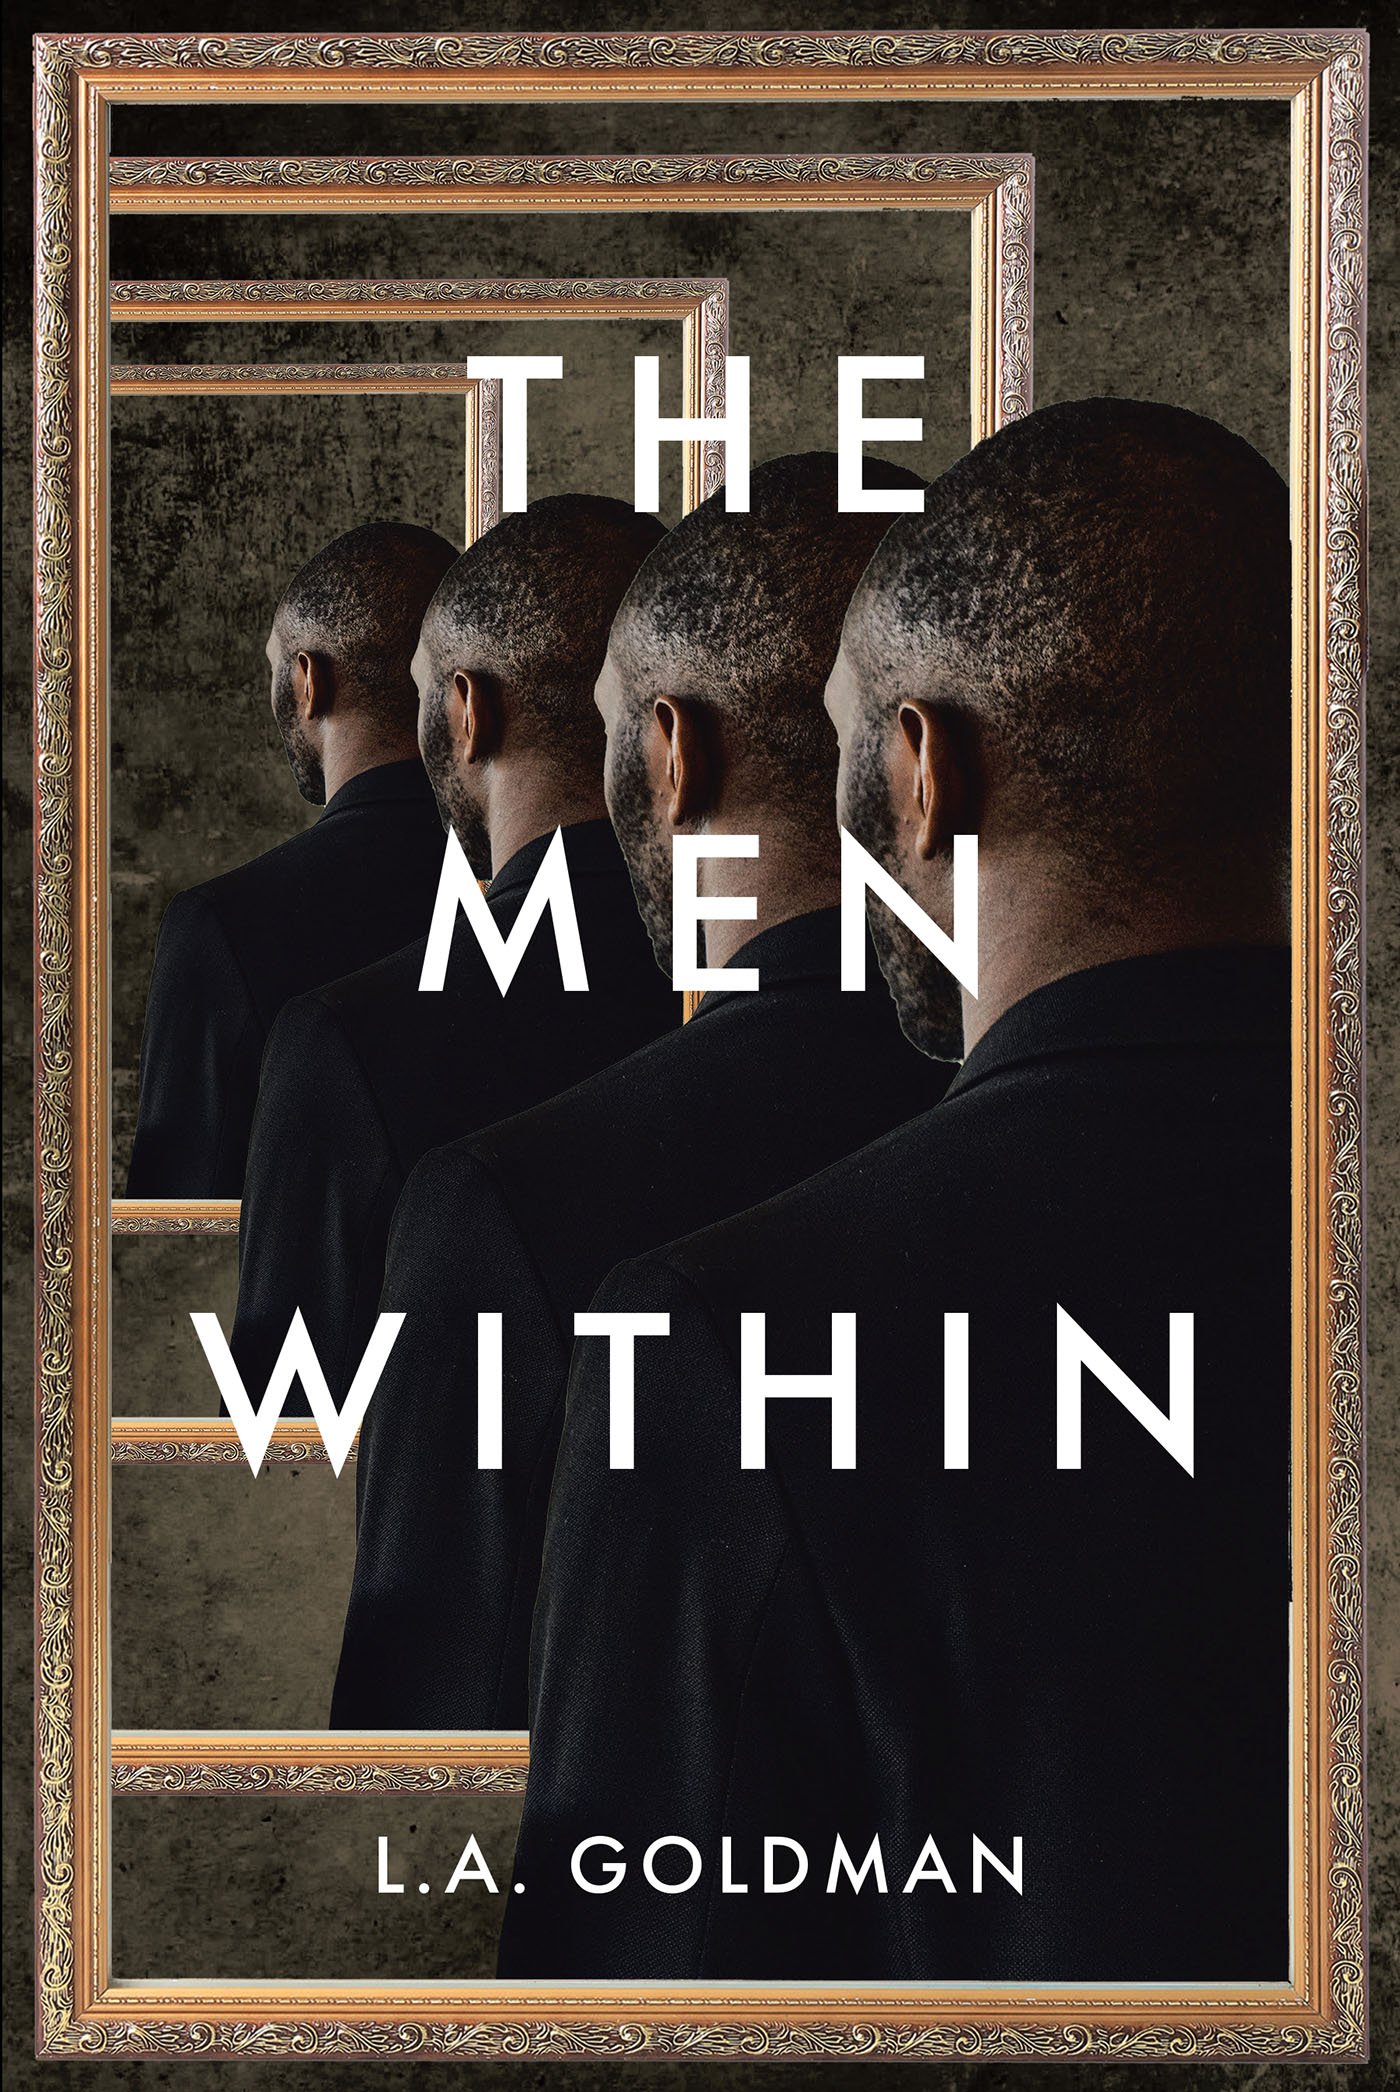 L.A. Goldman’s Newly Released "The Men Within" is a Thought-Provoking Examination of the Duality of Man